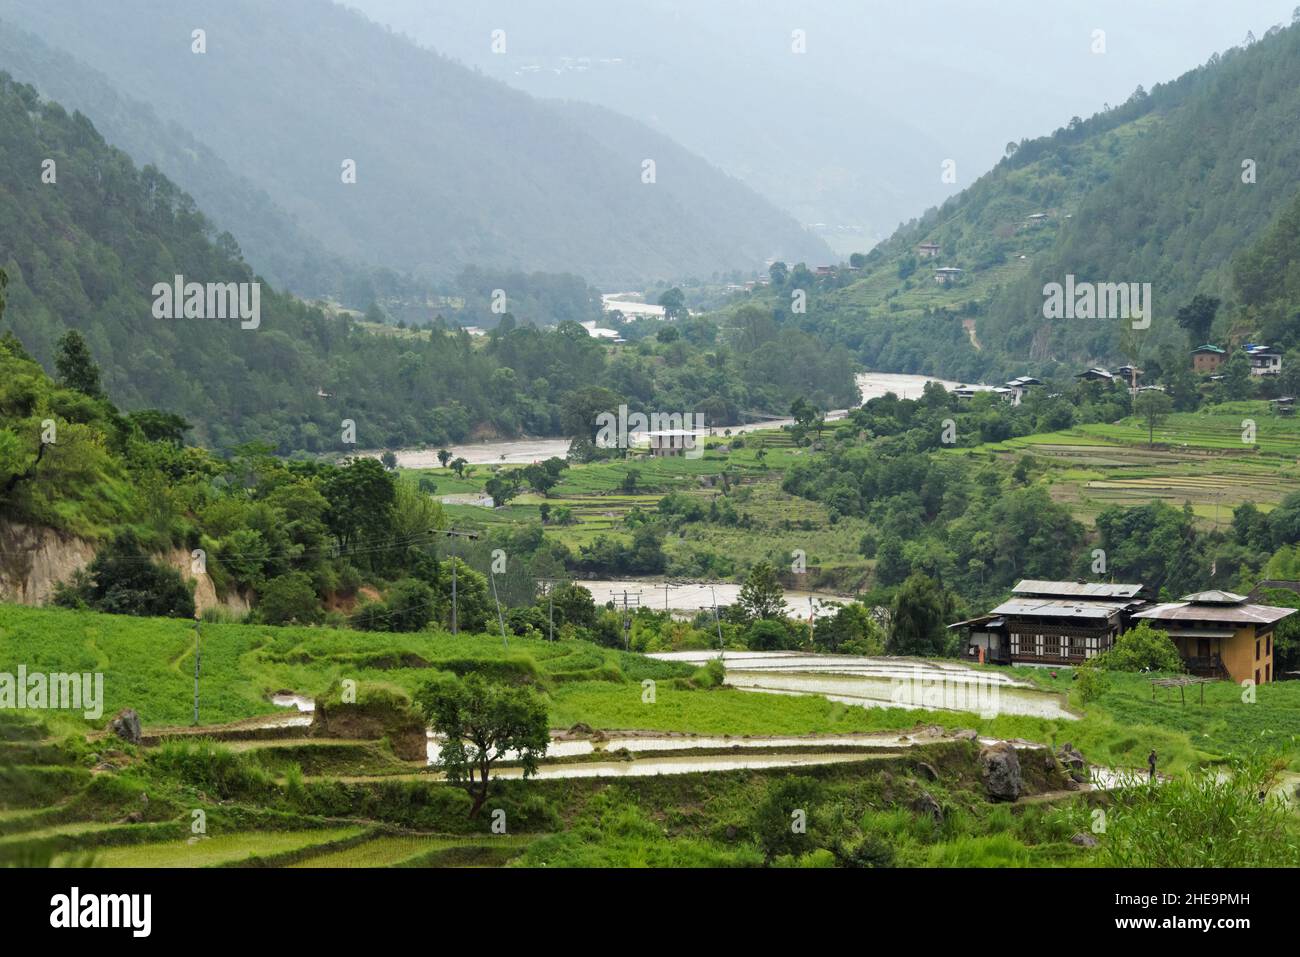 Village houe and rice paddy in the Himalayas, Punakha Valley, Bhutan Stock Photo